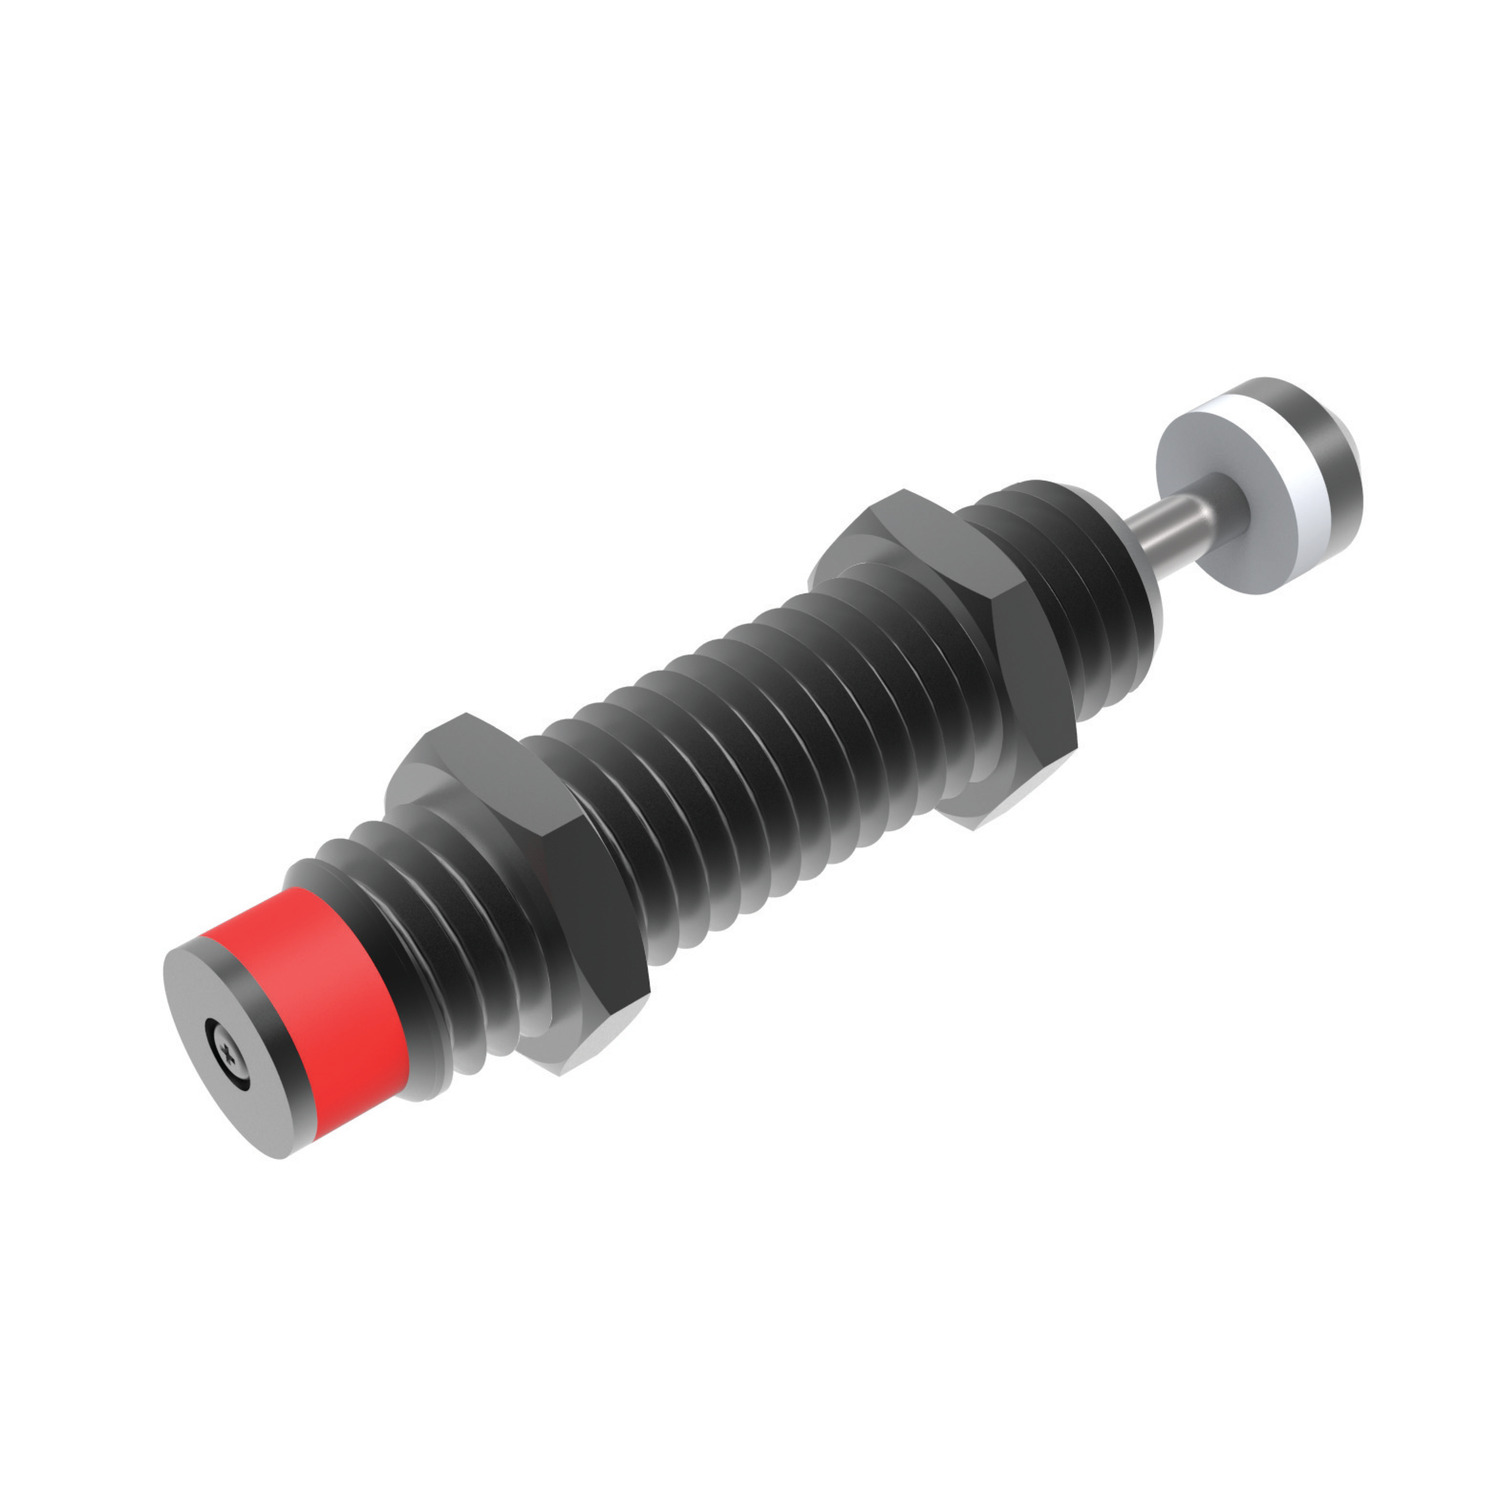 68001 - Minature Shock Absorbers, Self Compensating